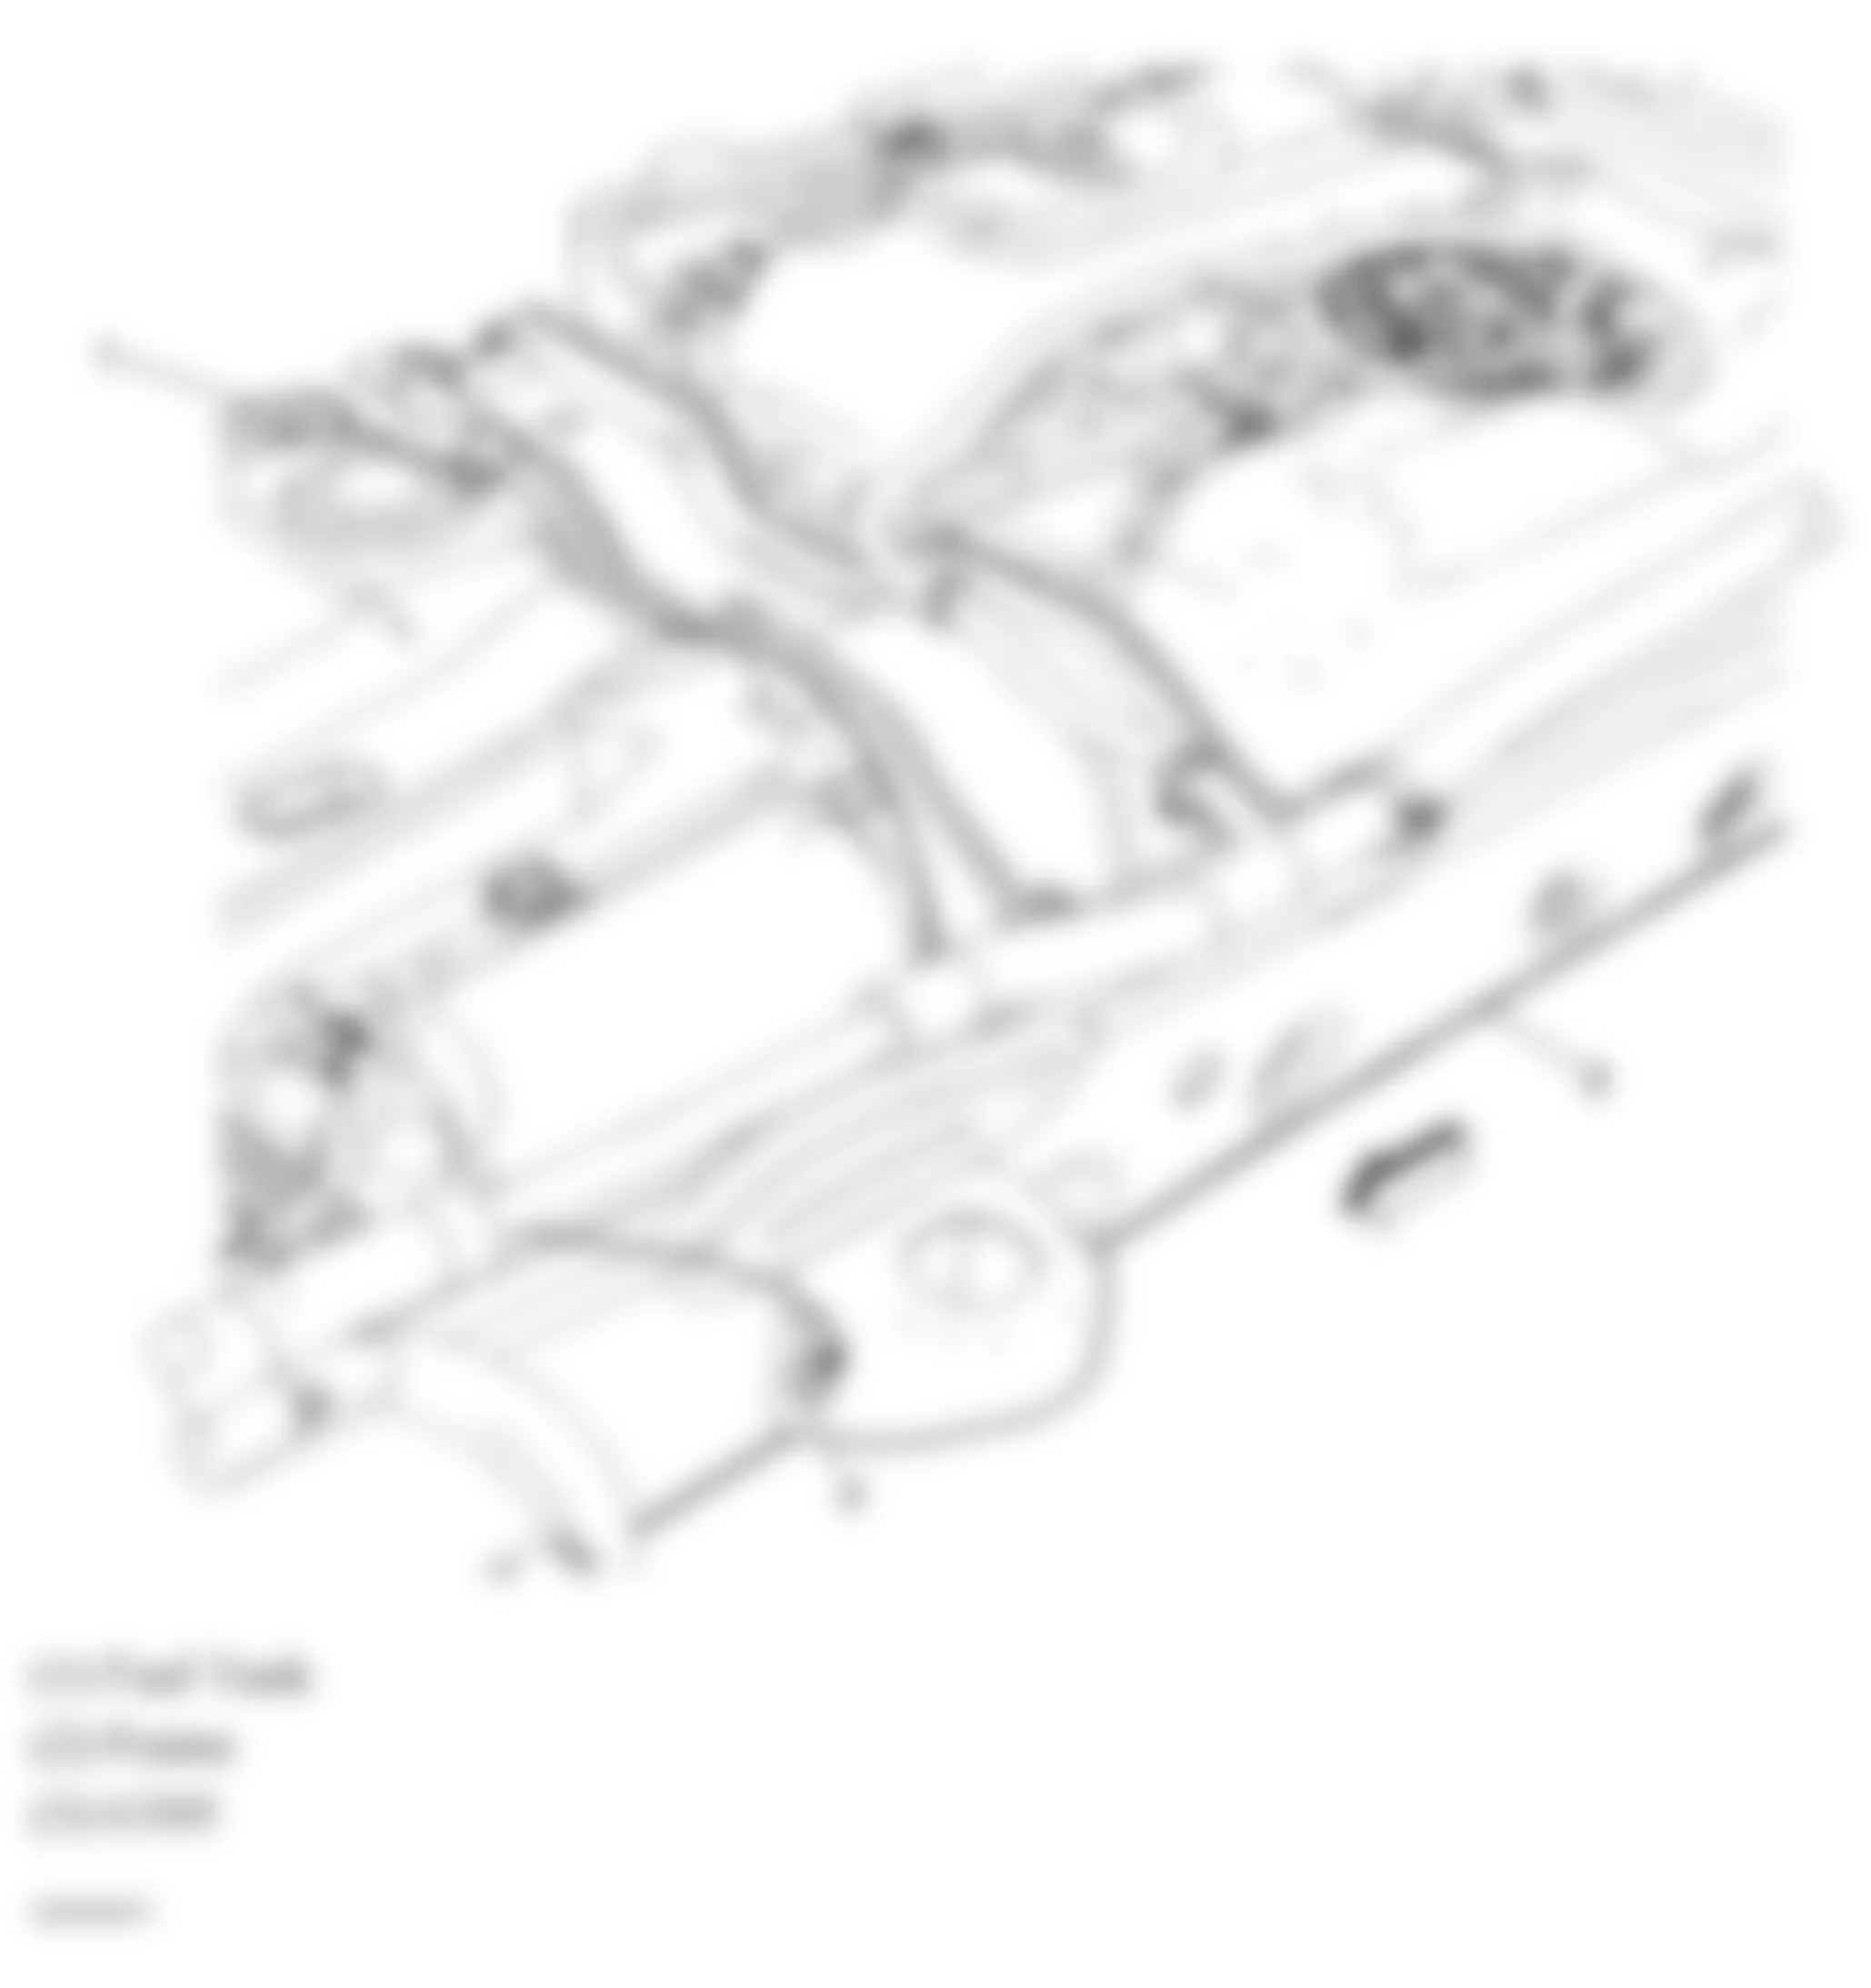 Chevrolet Tahoe 2009 - Component Locations -  Rear Chassis